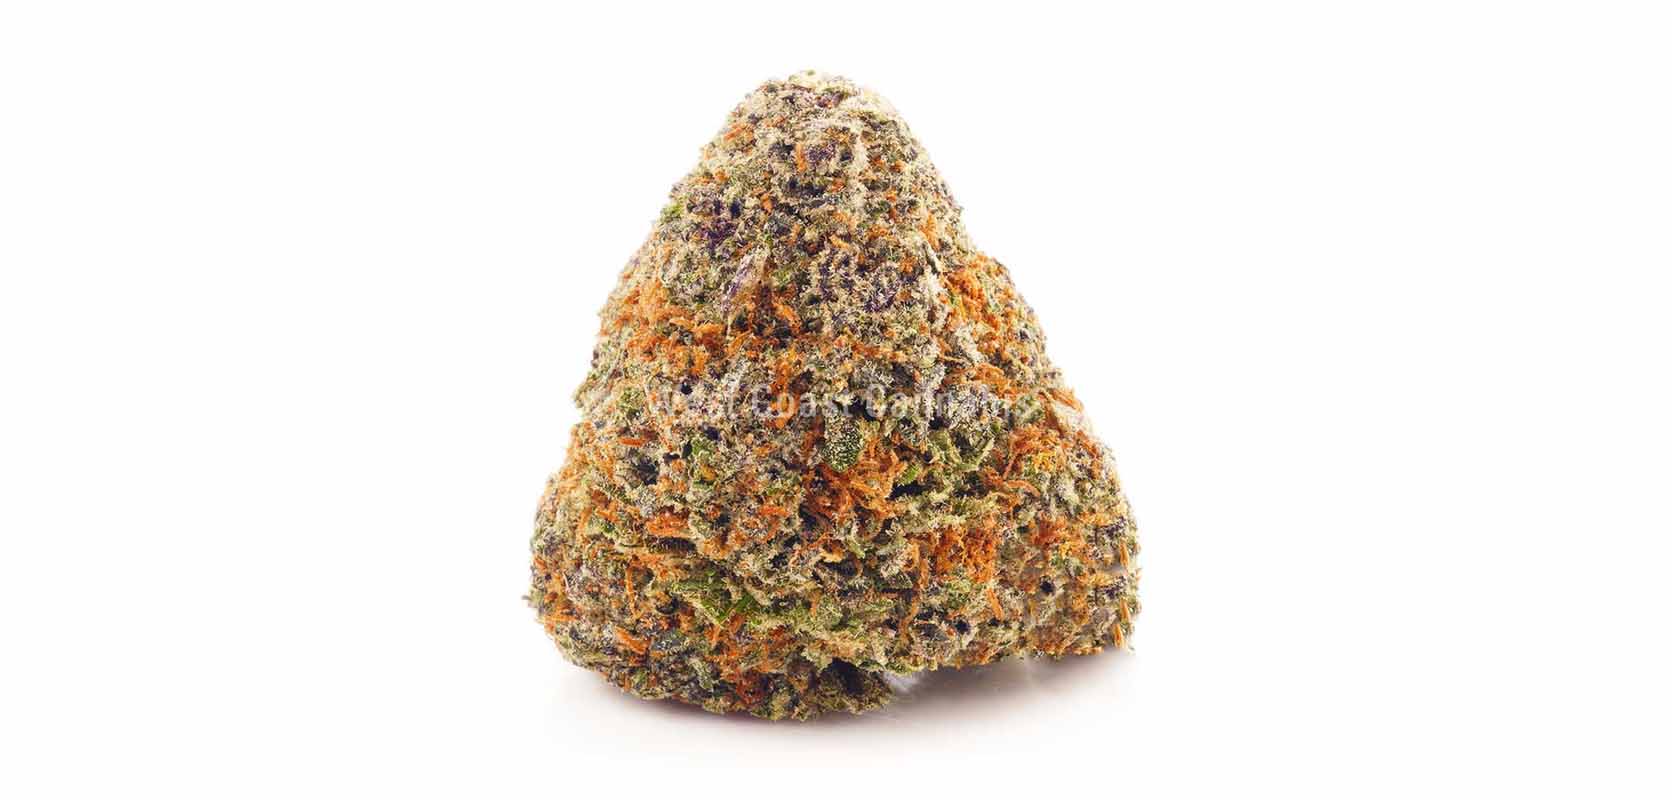 Fruity Pebbles weed online Canada from West Coast Cannabis dispensary and mail order marijuana weed store. buy weed online Canada.